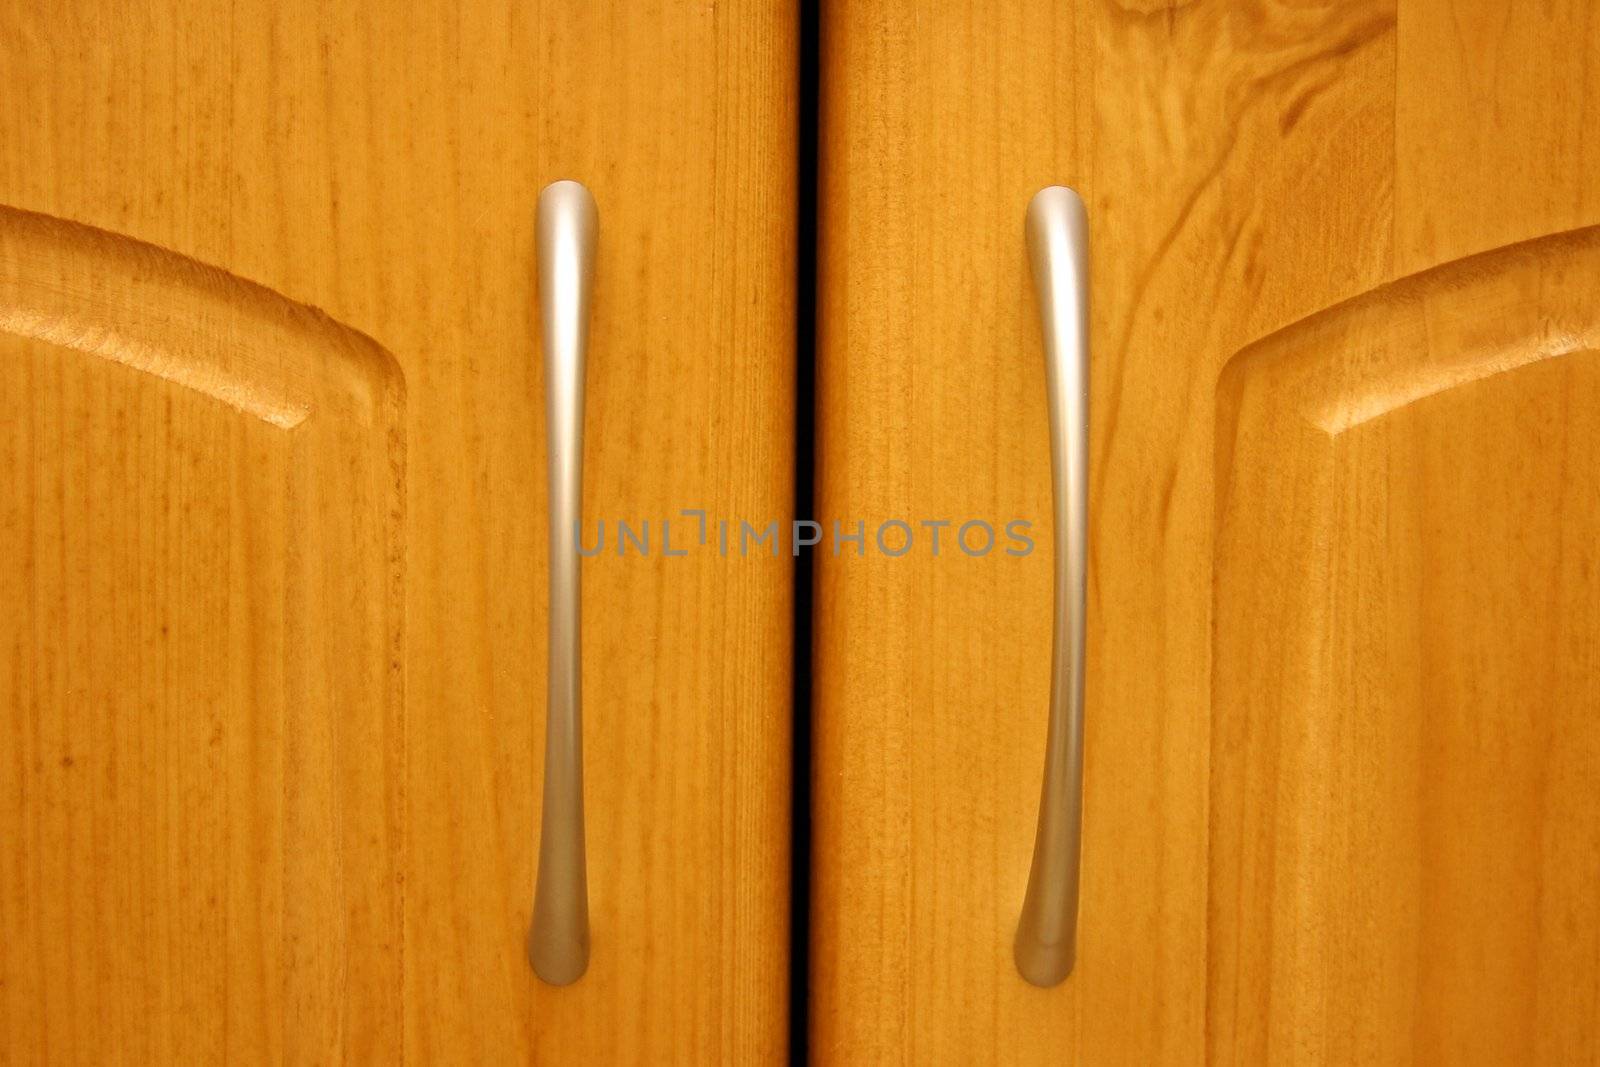 Furniture handles (front close-up)